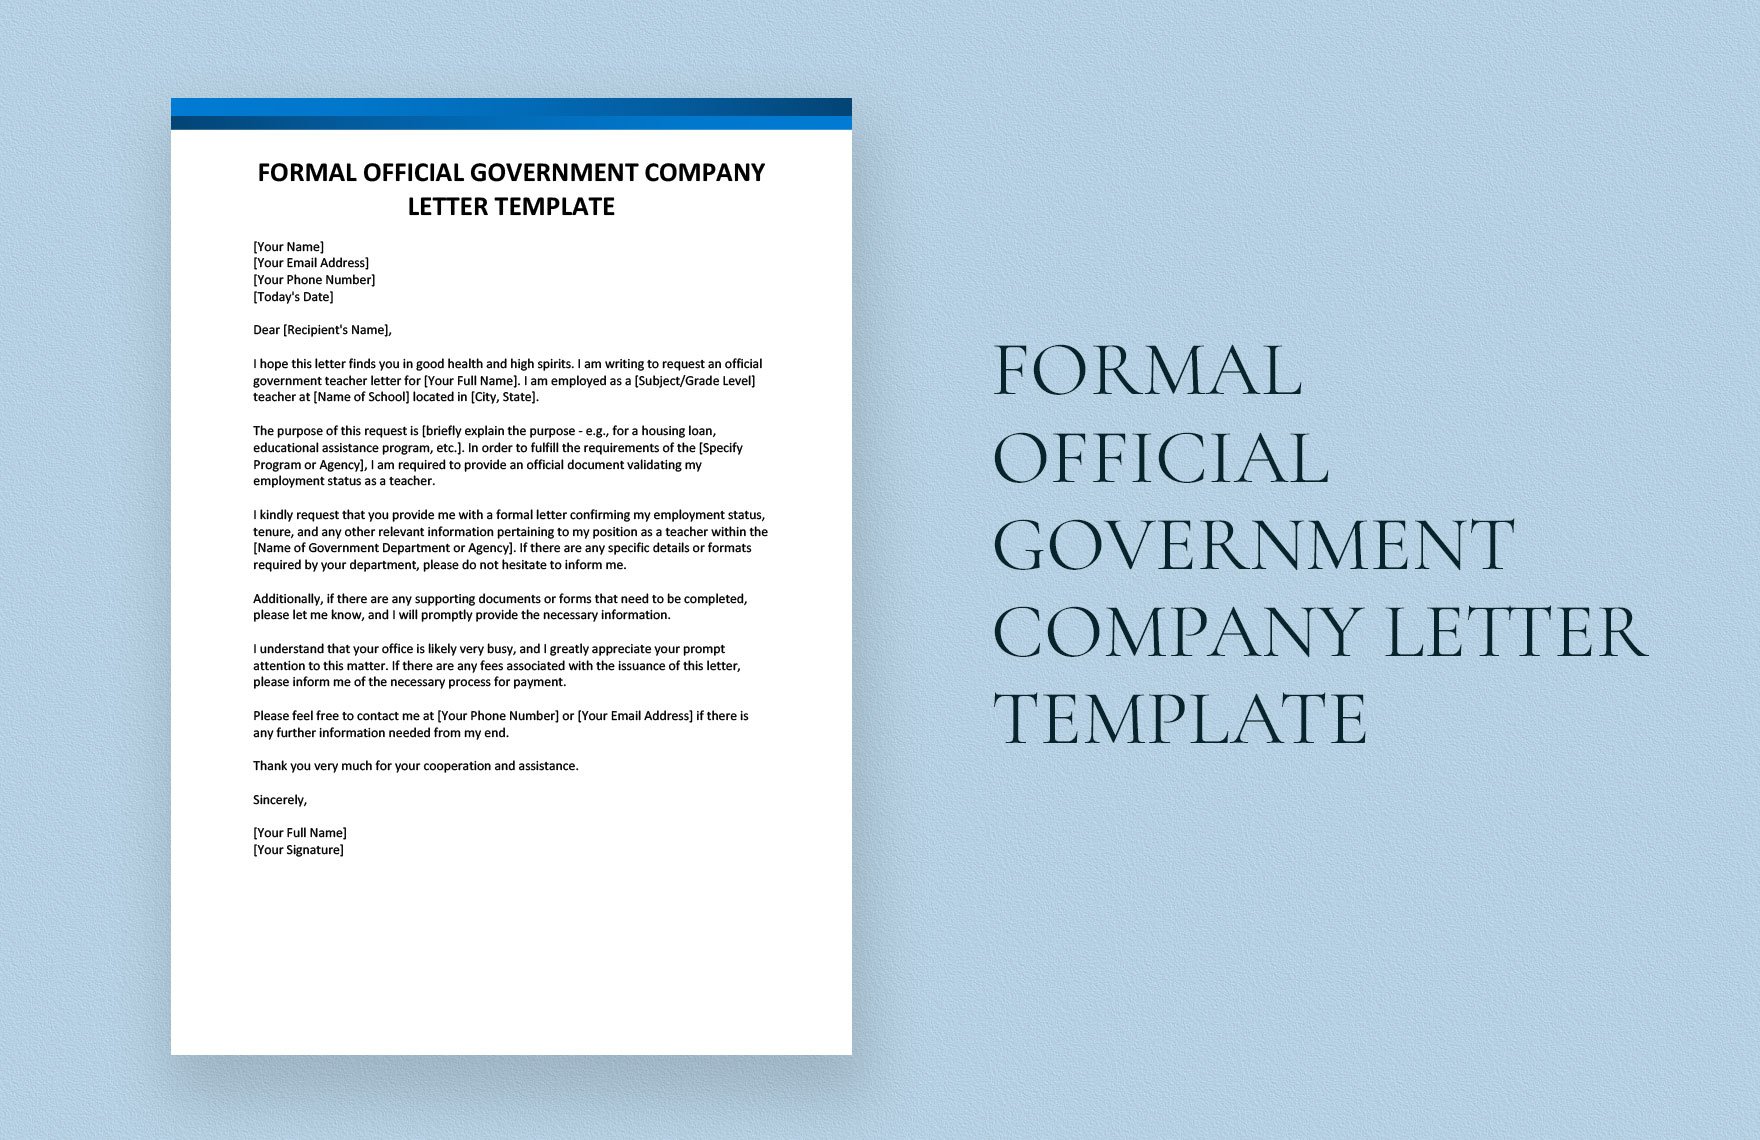 Formal Official Government Company Letter Template in Word, Google Docs